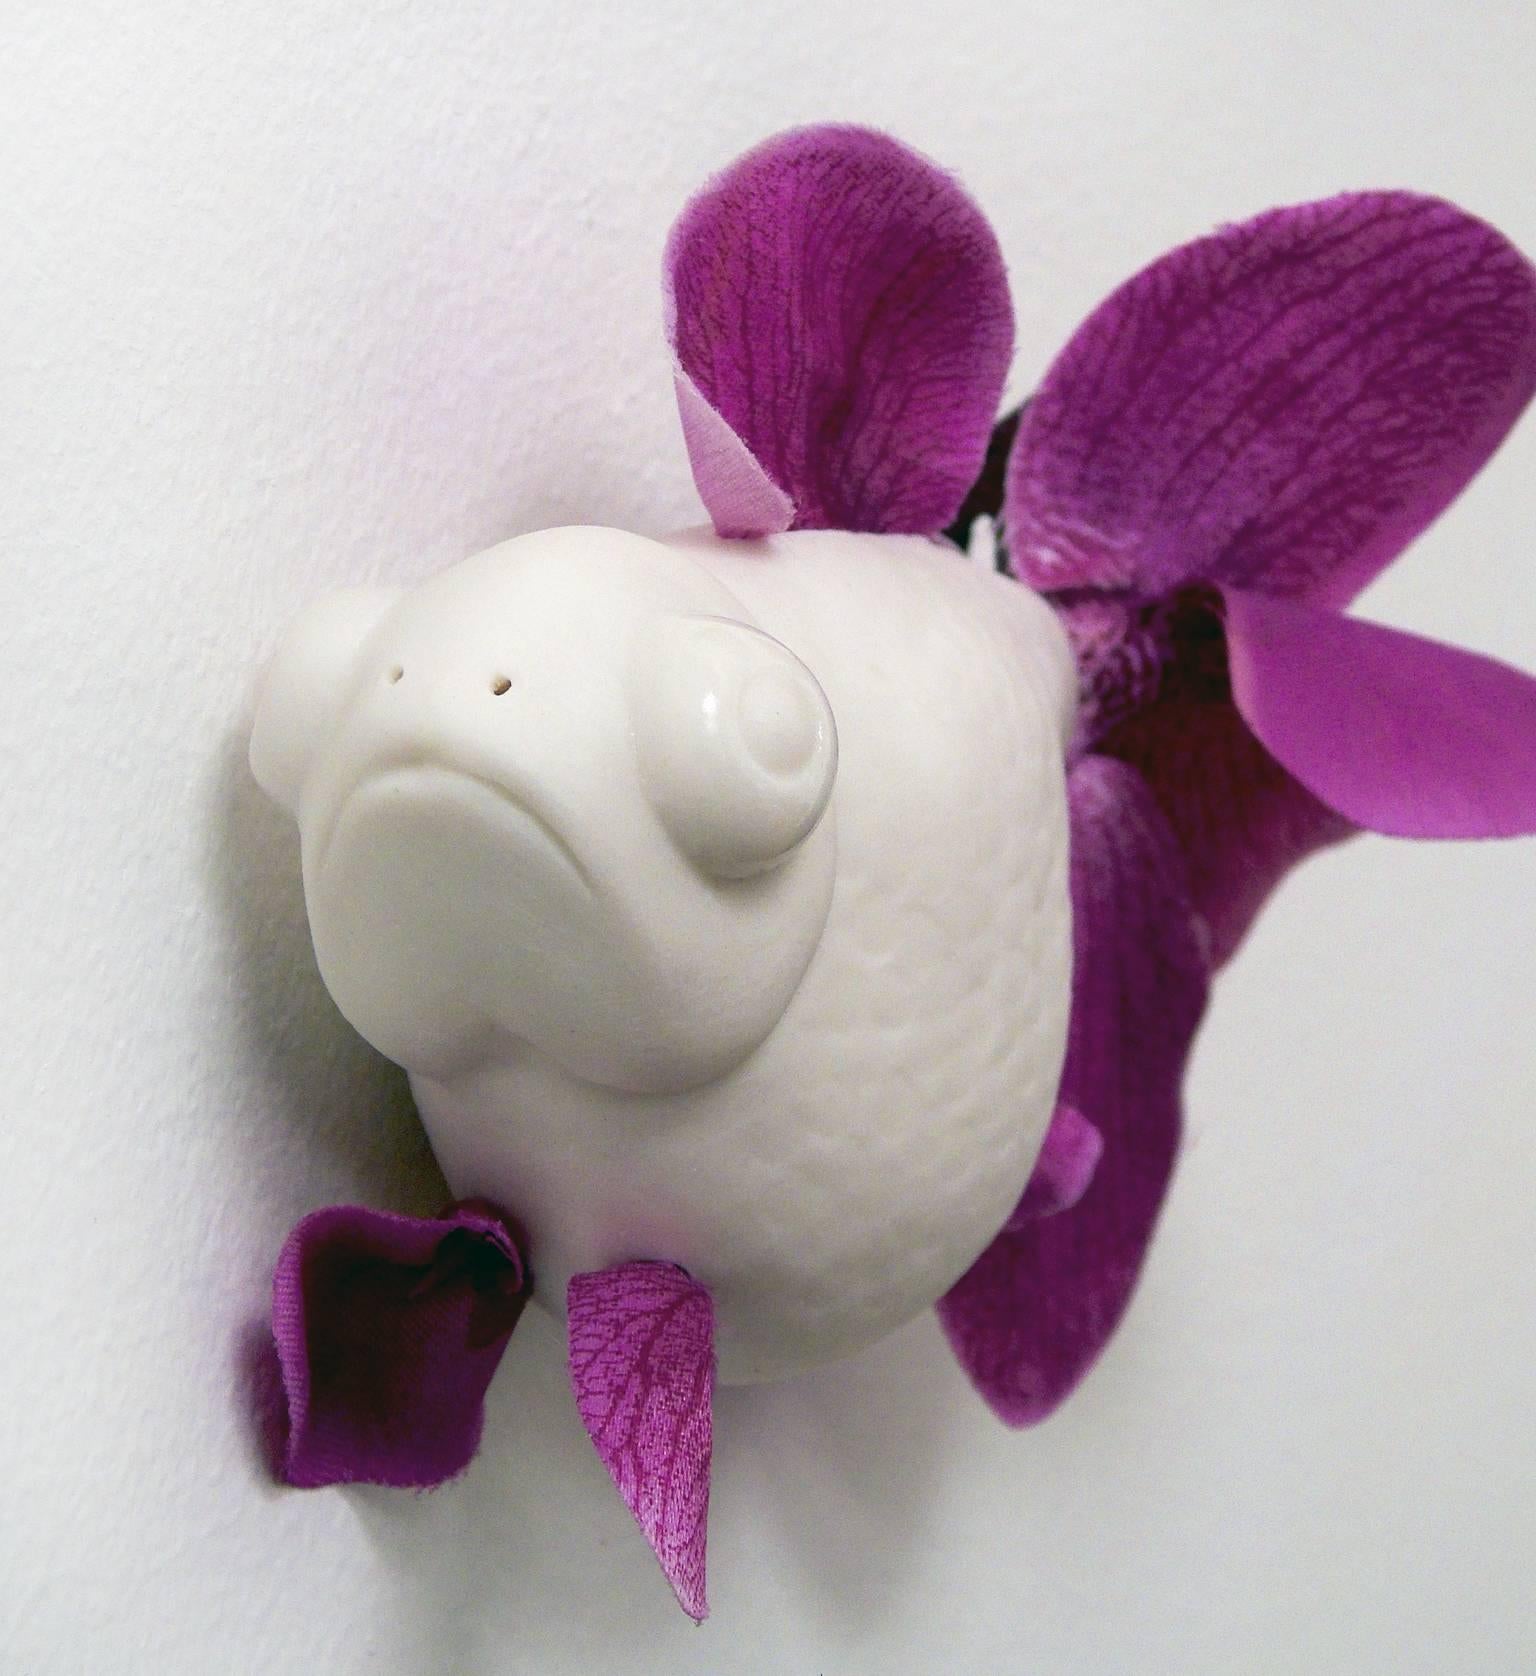 This little fish by Bethany Krull, is made of white porcelain and fuchsia colored, artificial orchids. If you've ever looked at a fan tailed fish and marveled at the flamboyant tail you understand the inspiration for this playful portrayal. ;Prize